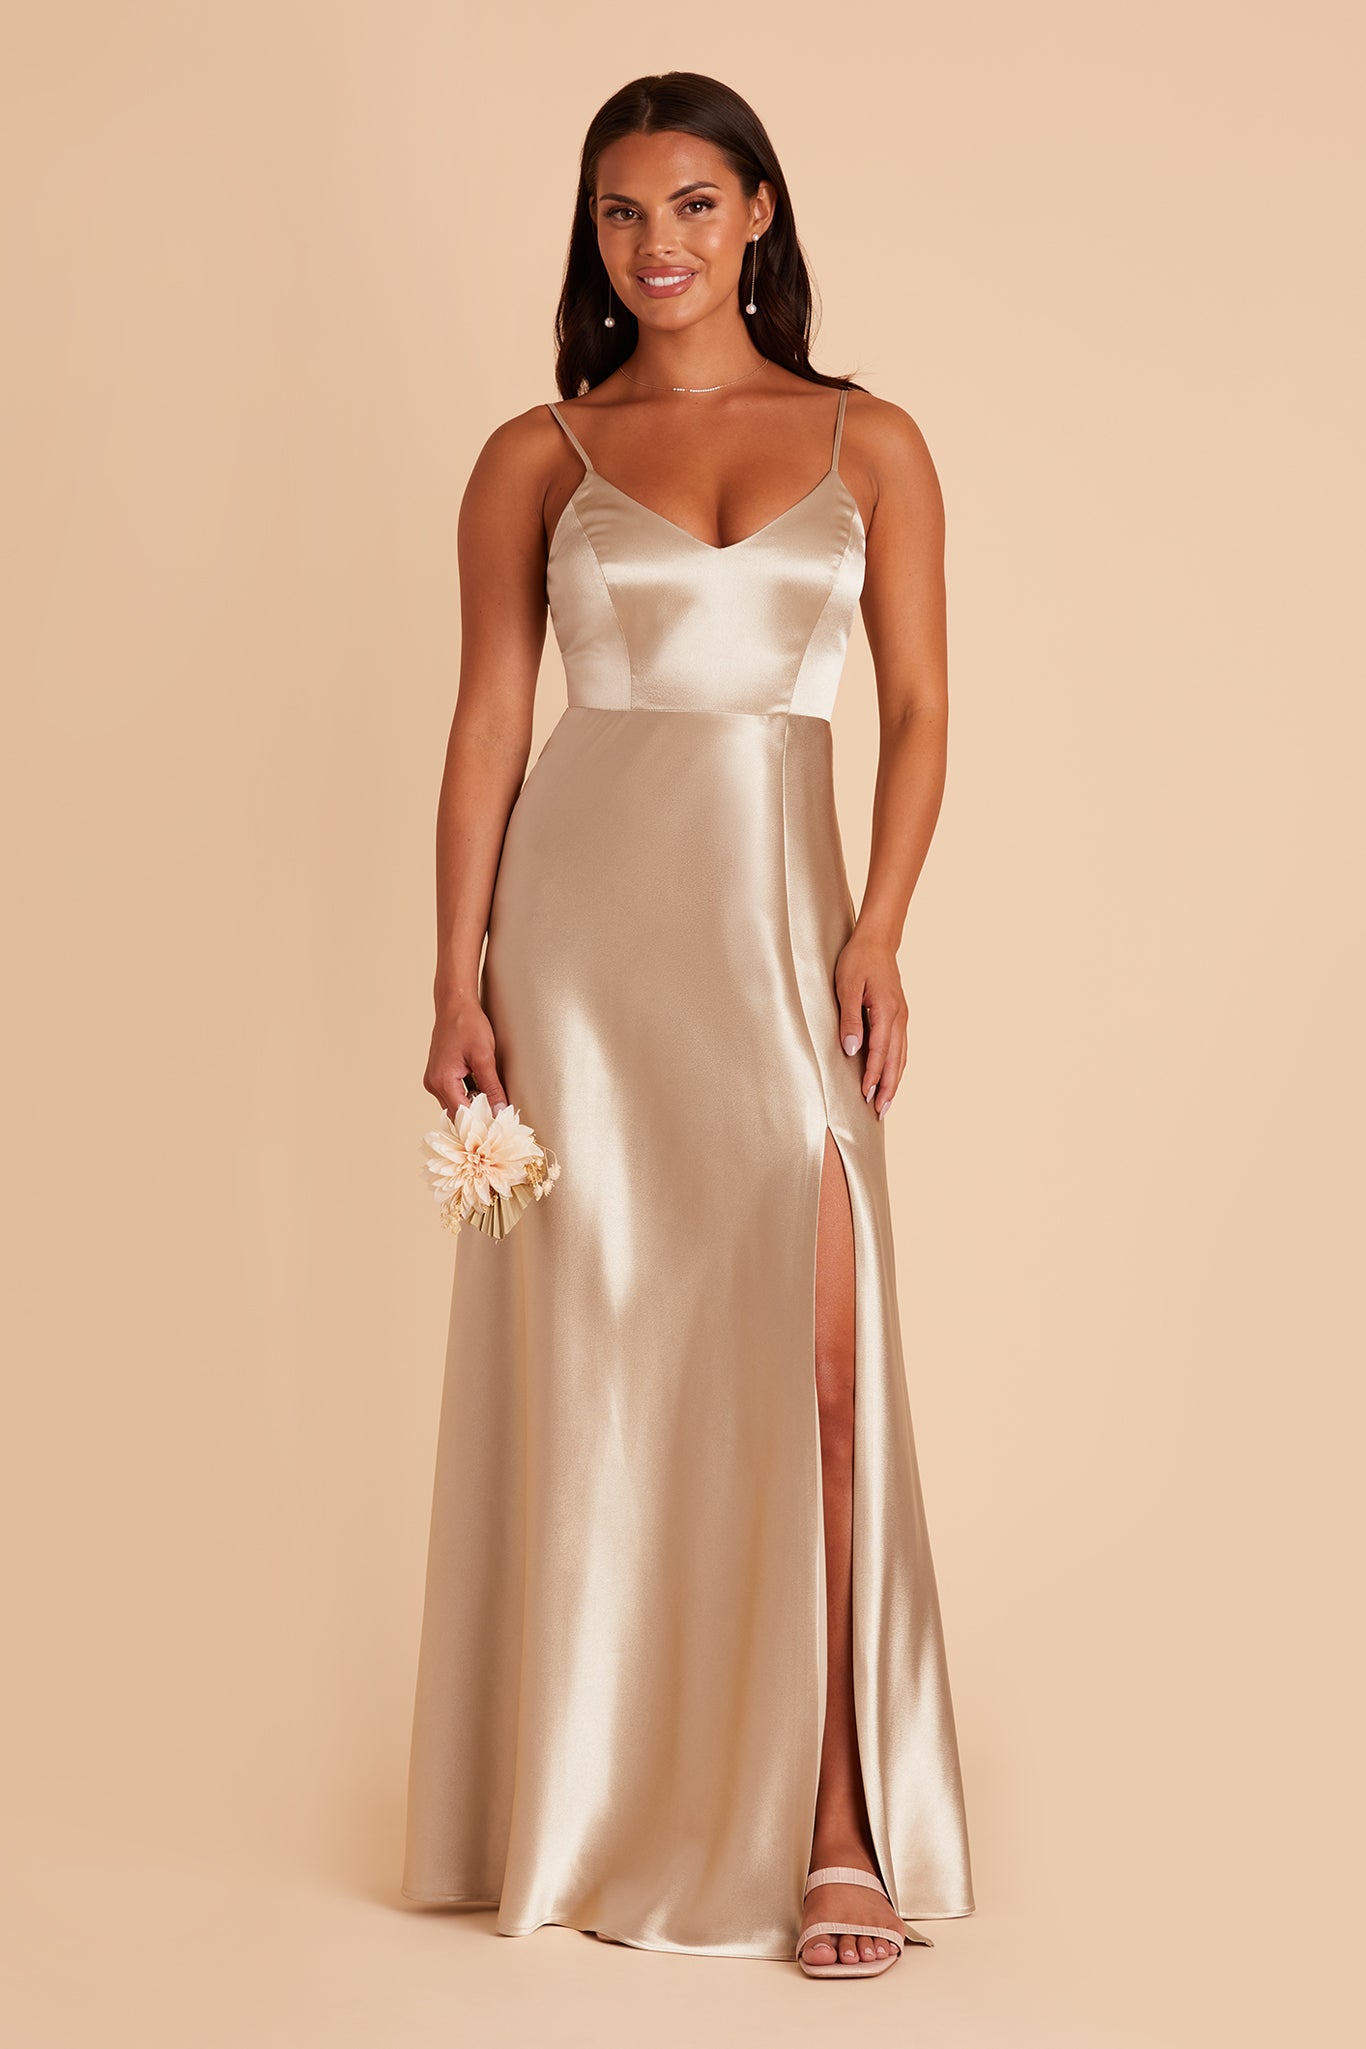 Glamourous Champagne Cowl Neck Maxi Dress - All Dresses | Red Dress